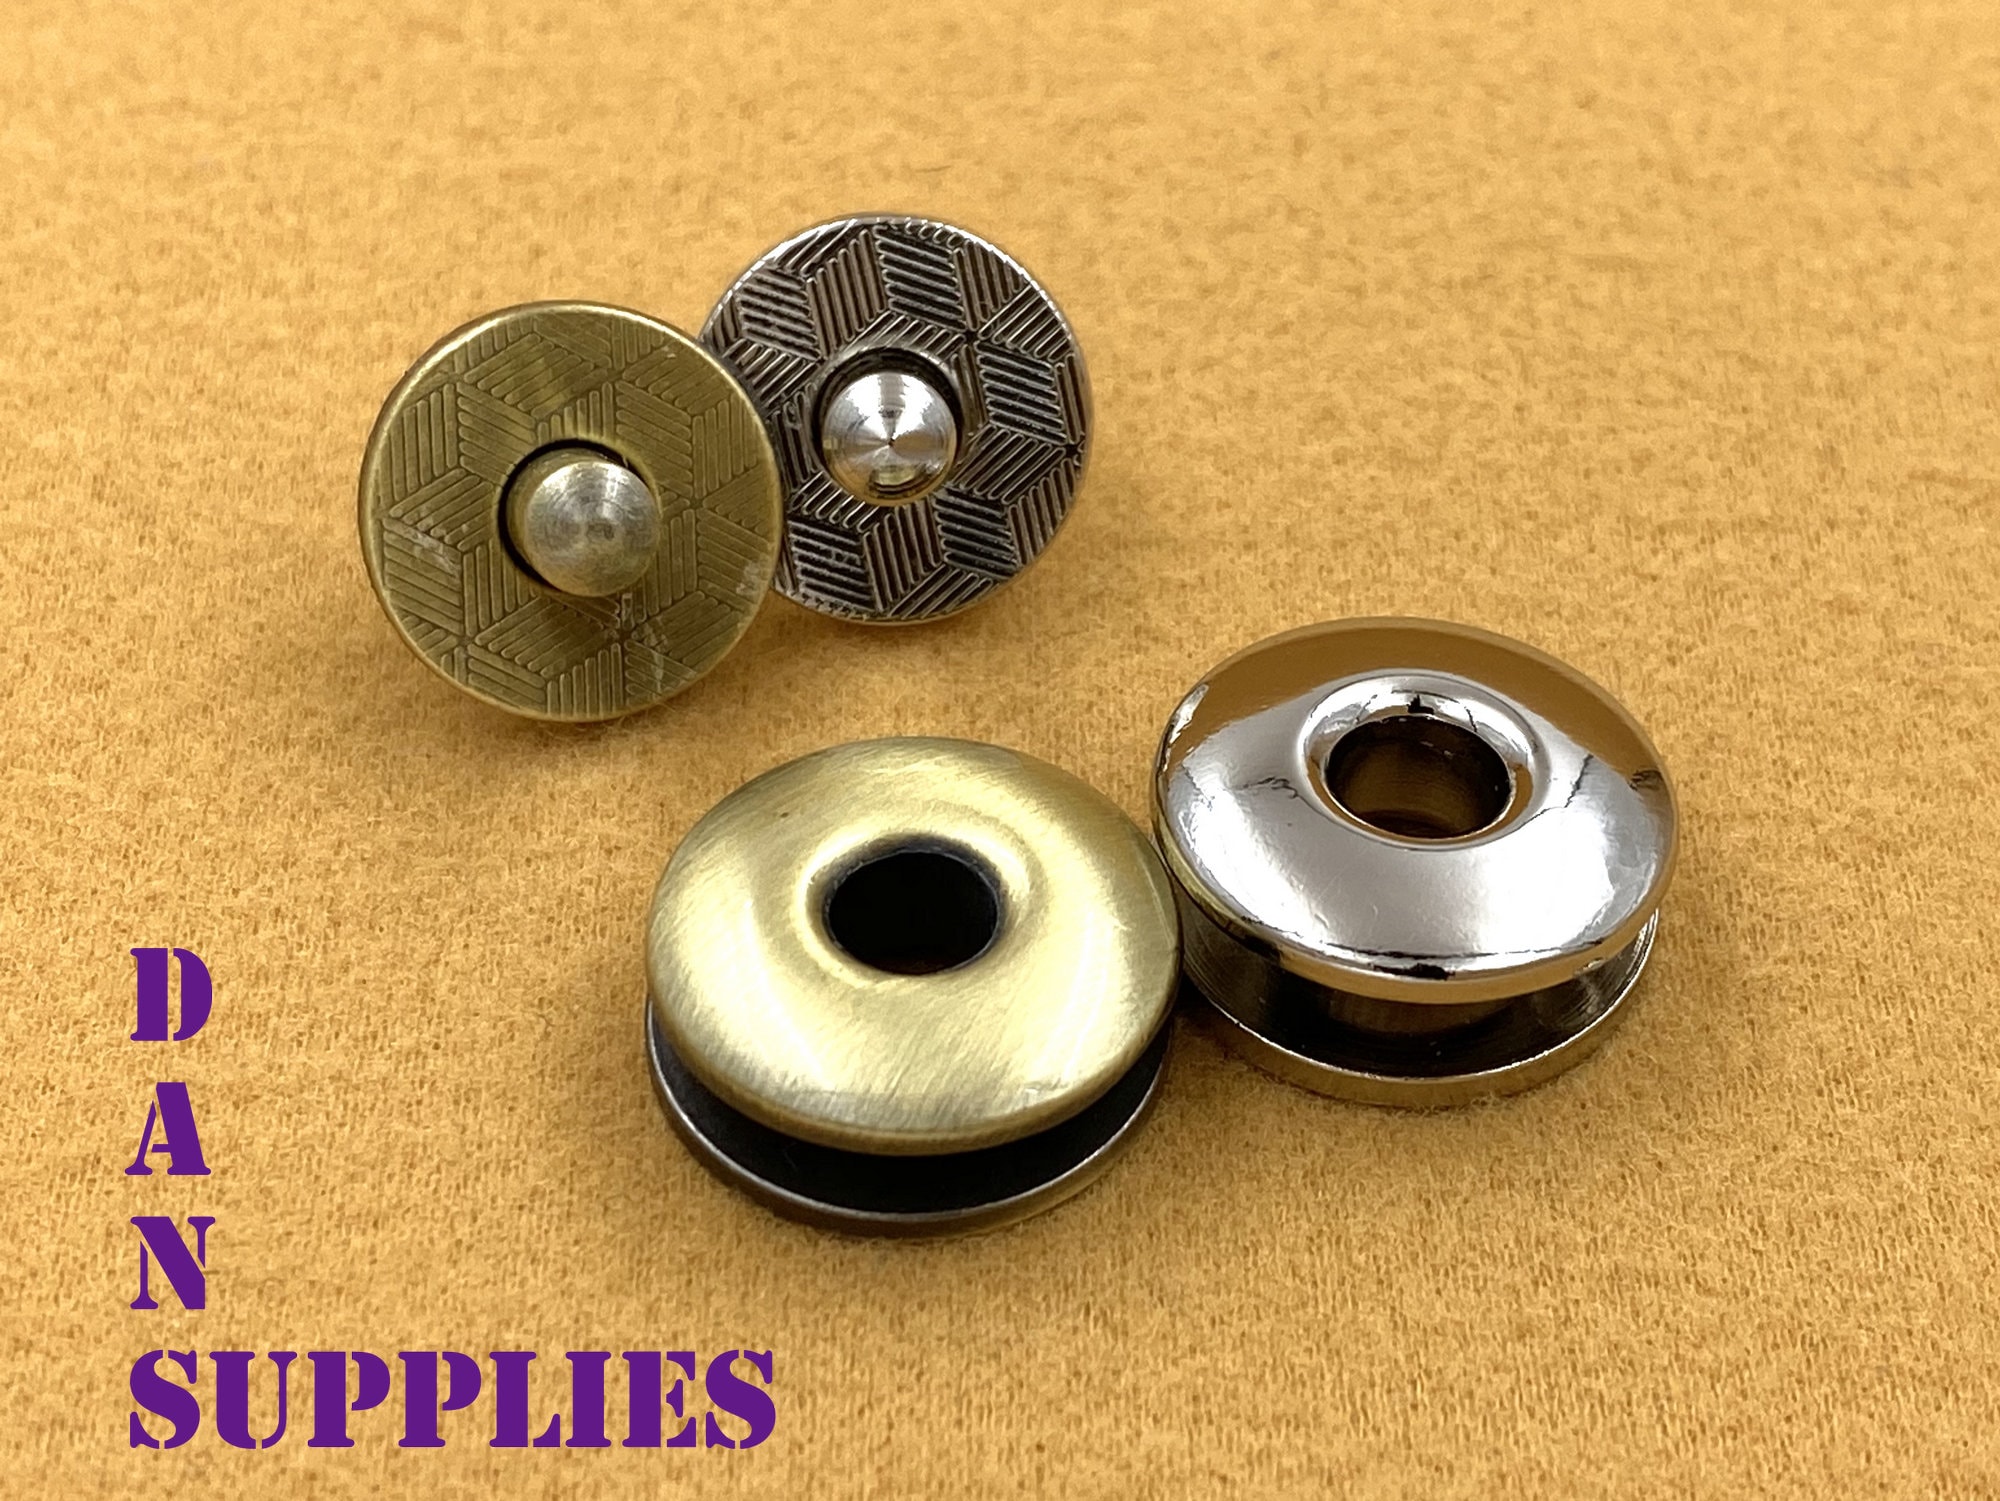 10 sets Double Caps Magnetic Snaps Clasps for Bag Purse Leather Closures